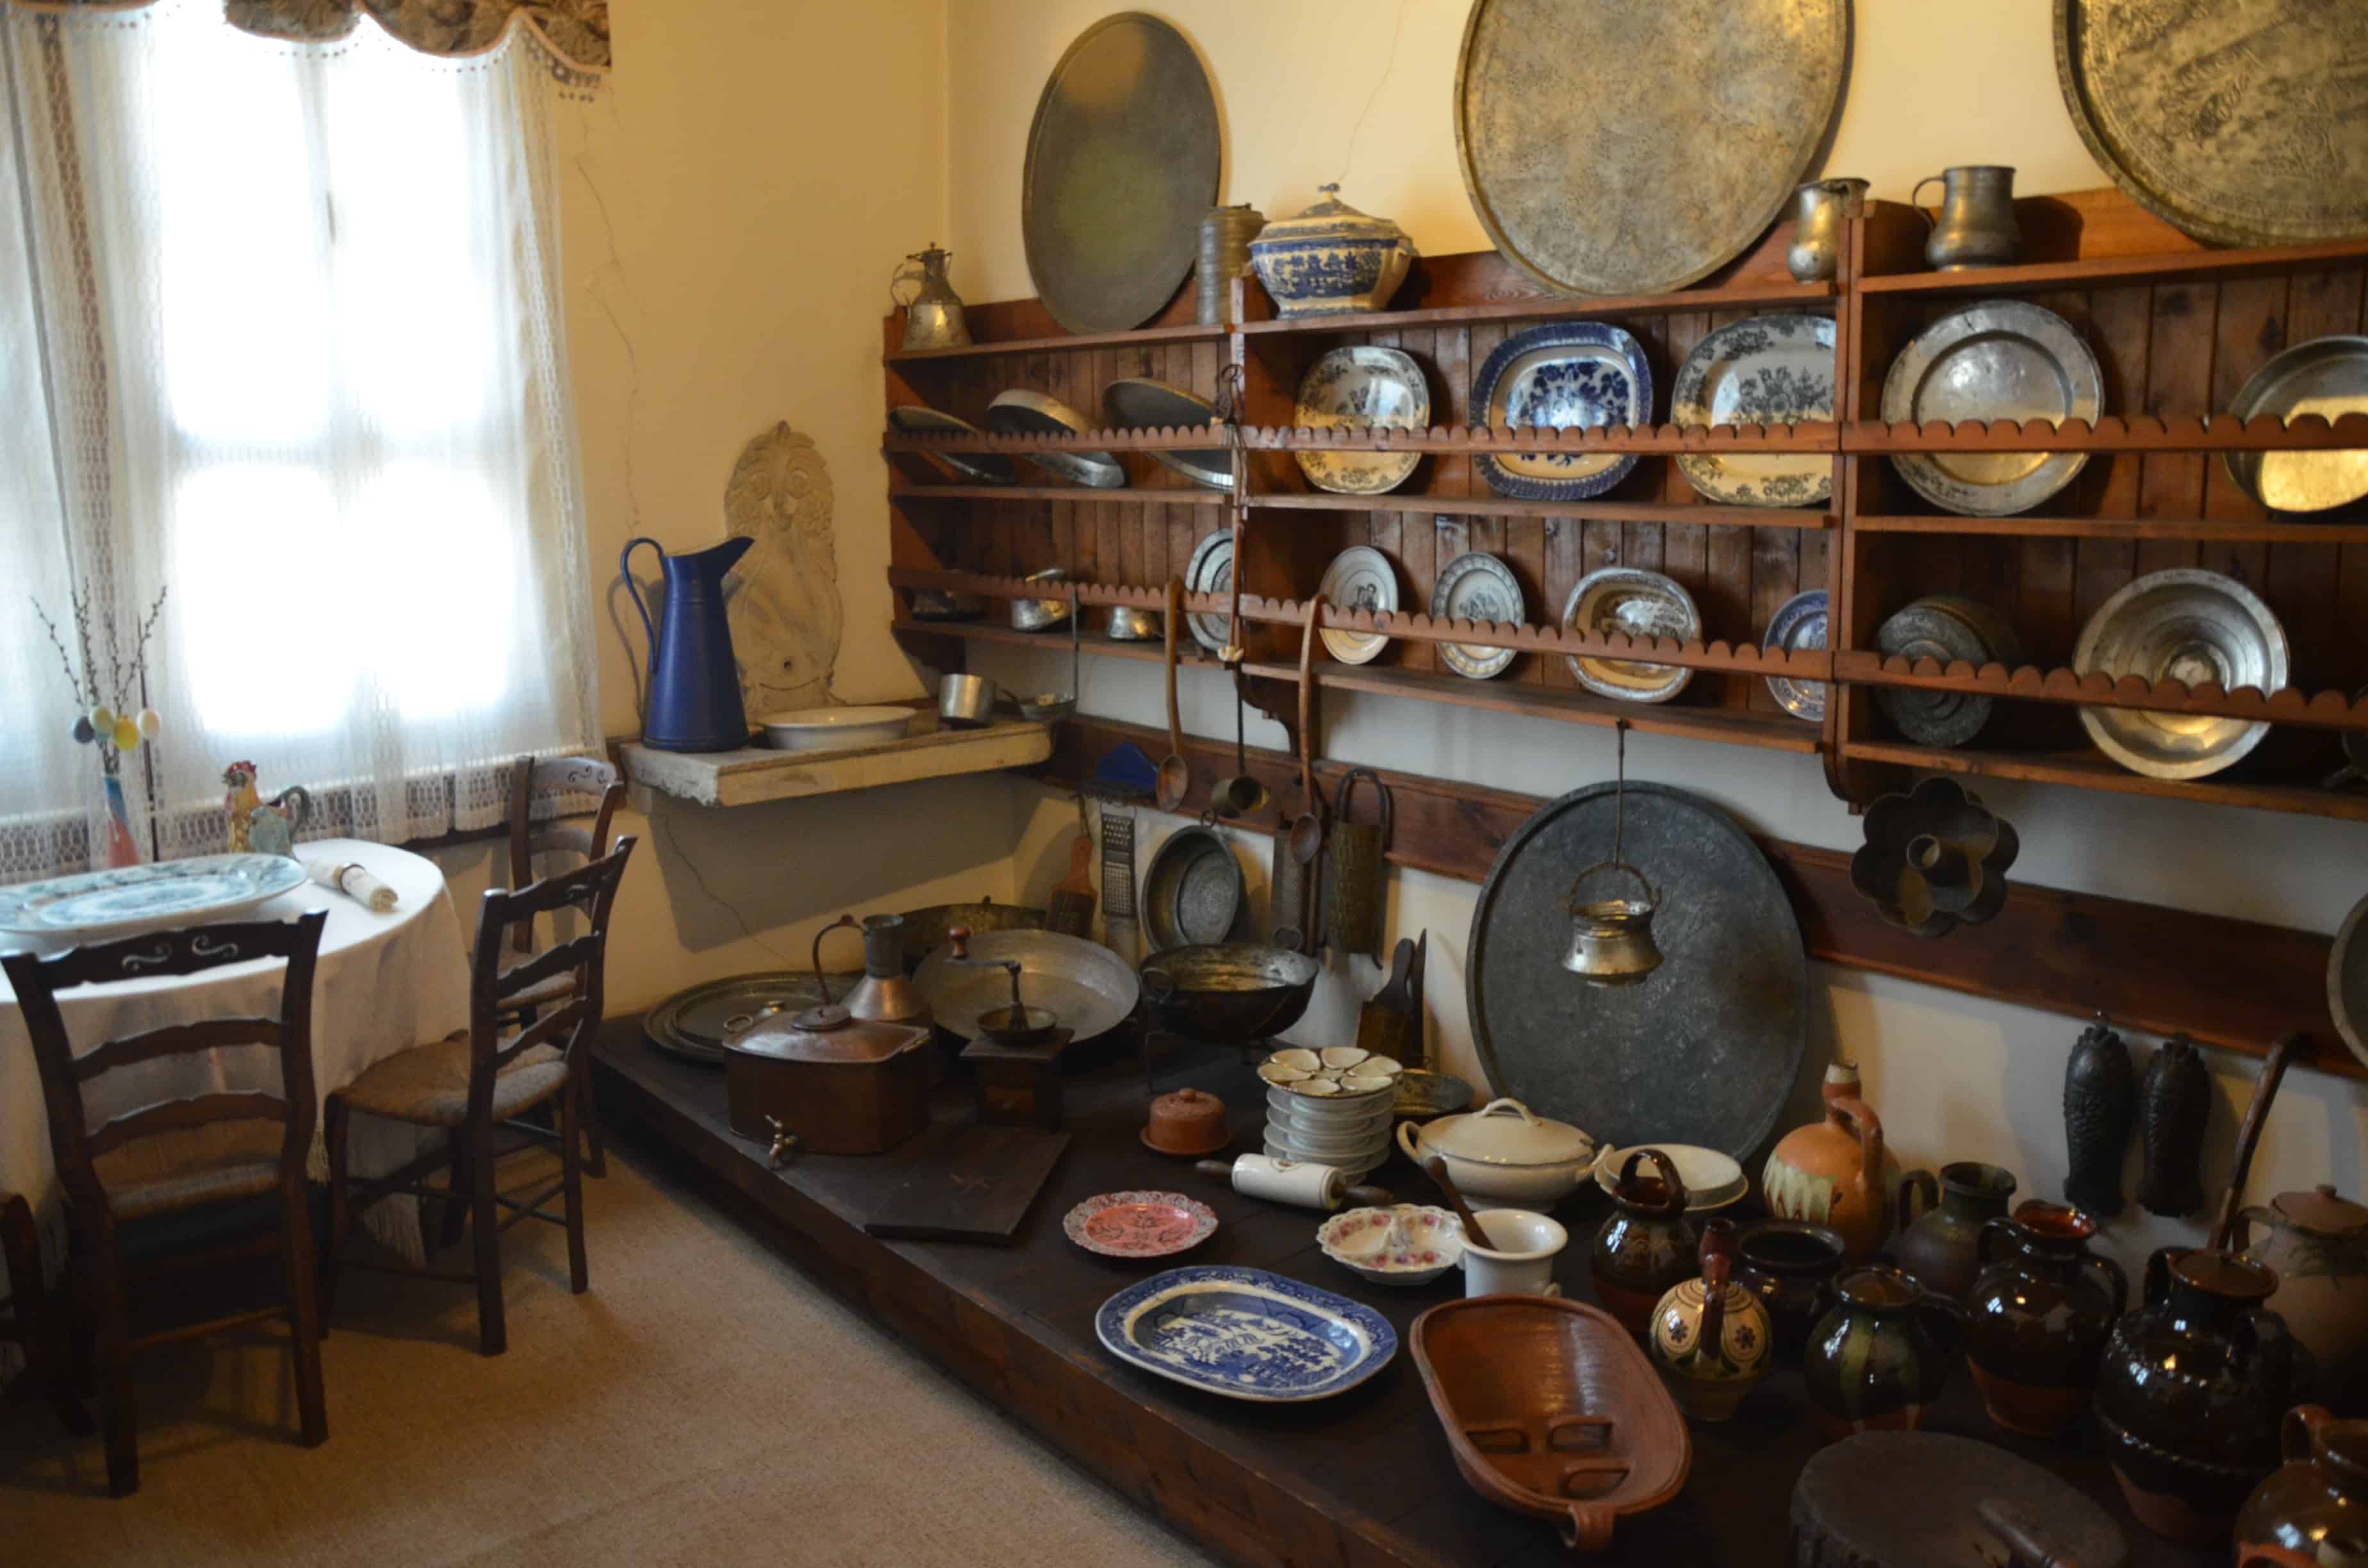 Kitchen at the Ethnographic Museum in Varna, Bulgaria